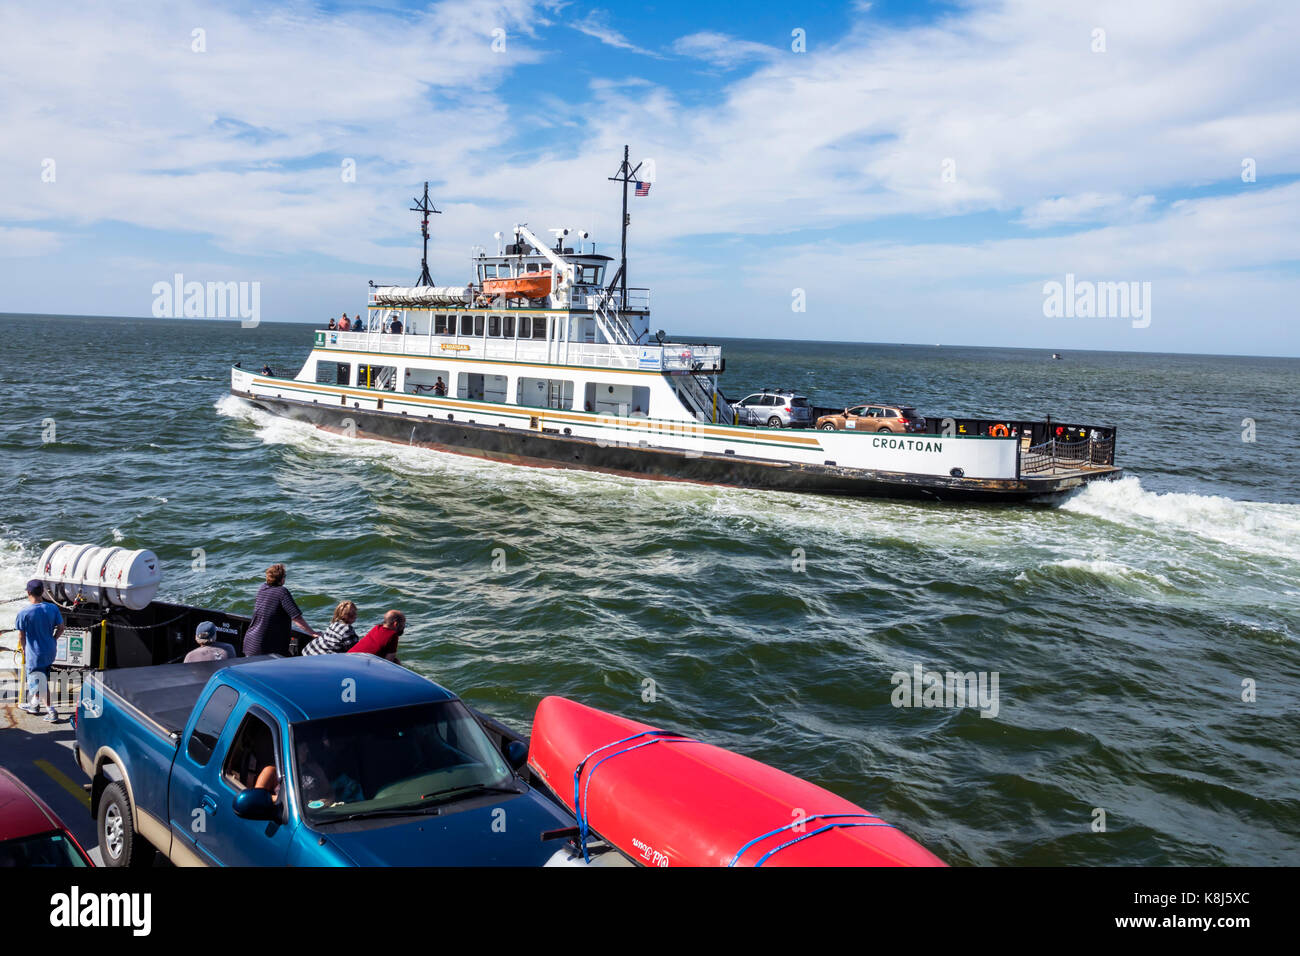 North Carolina,NC,Outer Banks,Pamlico Sound,Ocracoke Island,Hatteras,ferry,water,navigating,vehicles,waves,passing boat,NC170518140 Stock Photo